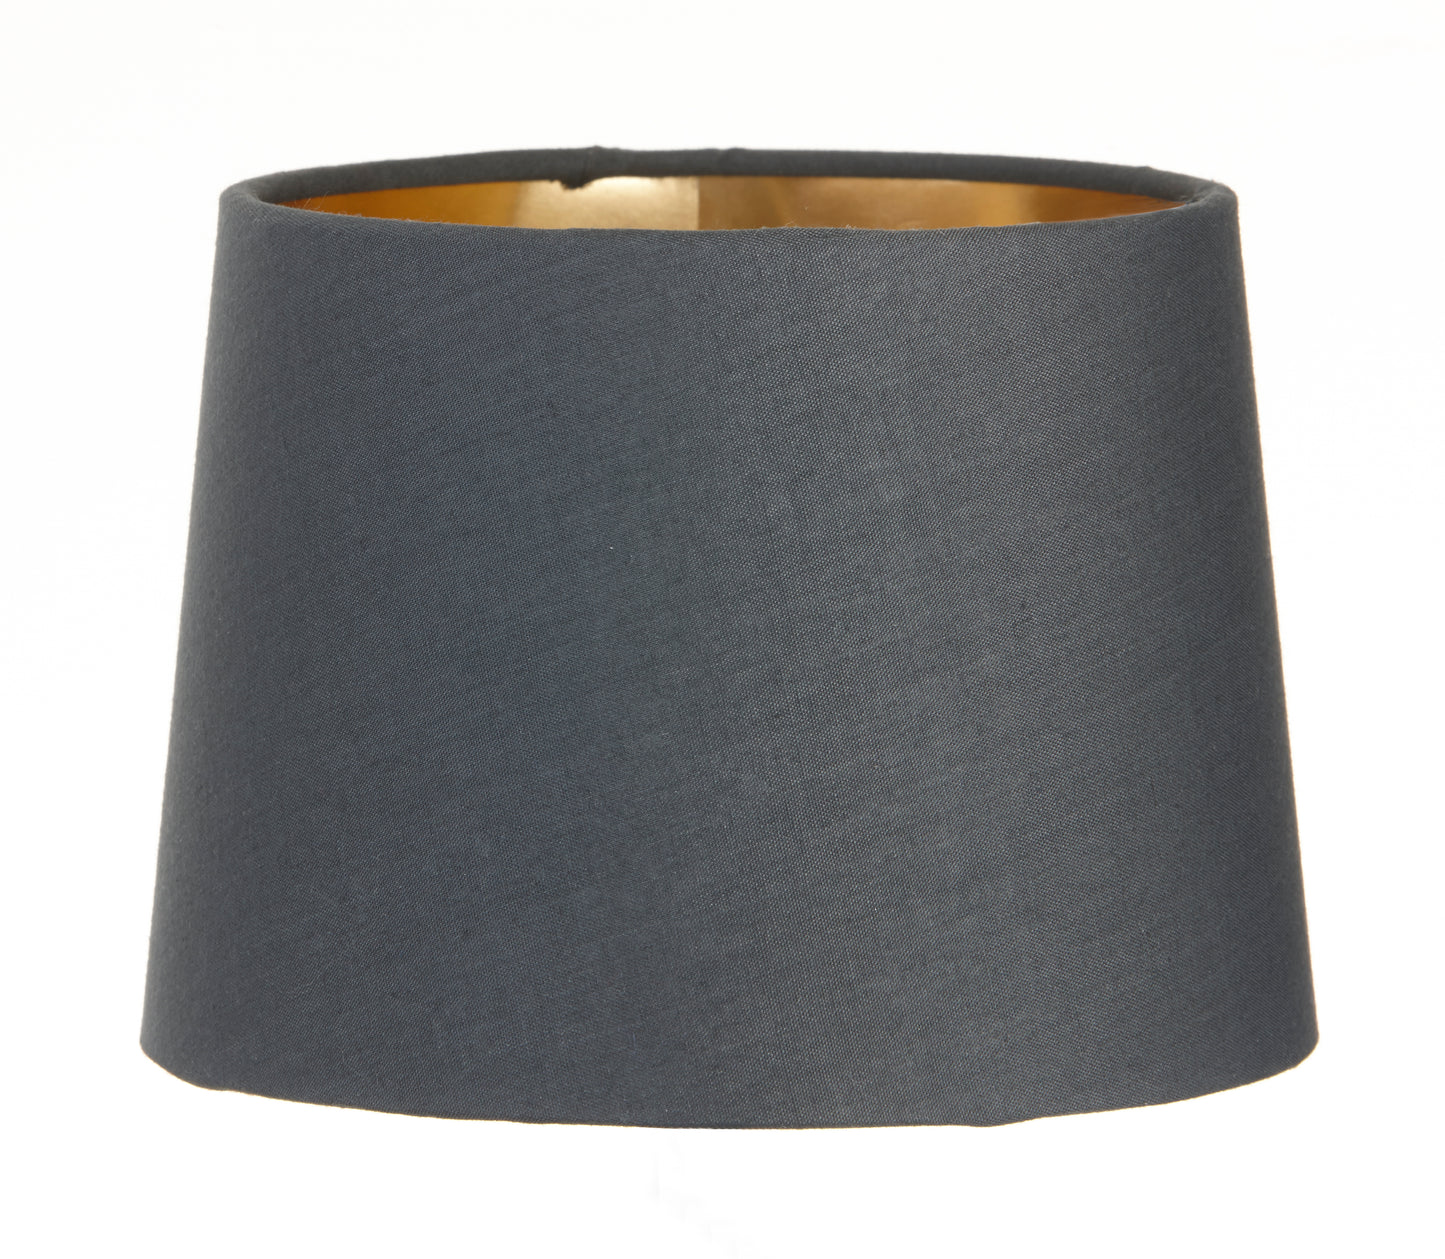 RV Astley Shade Charcoal Gold Lining 15cm